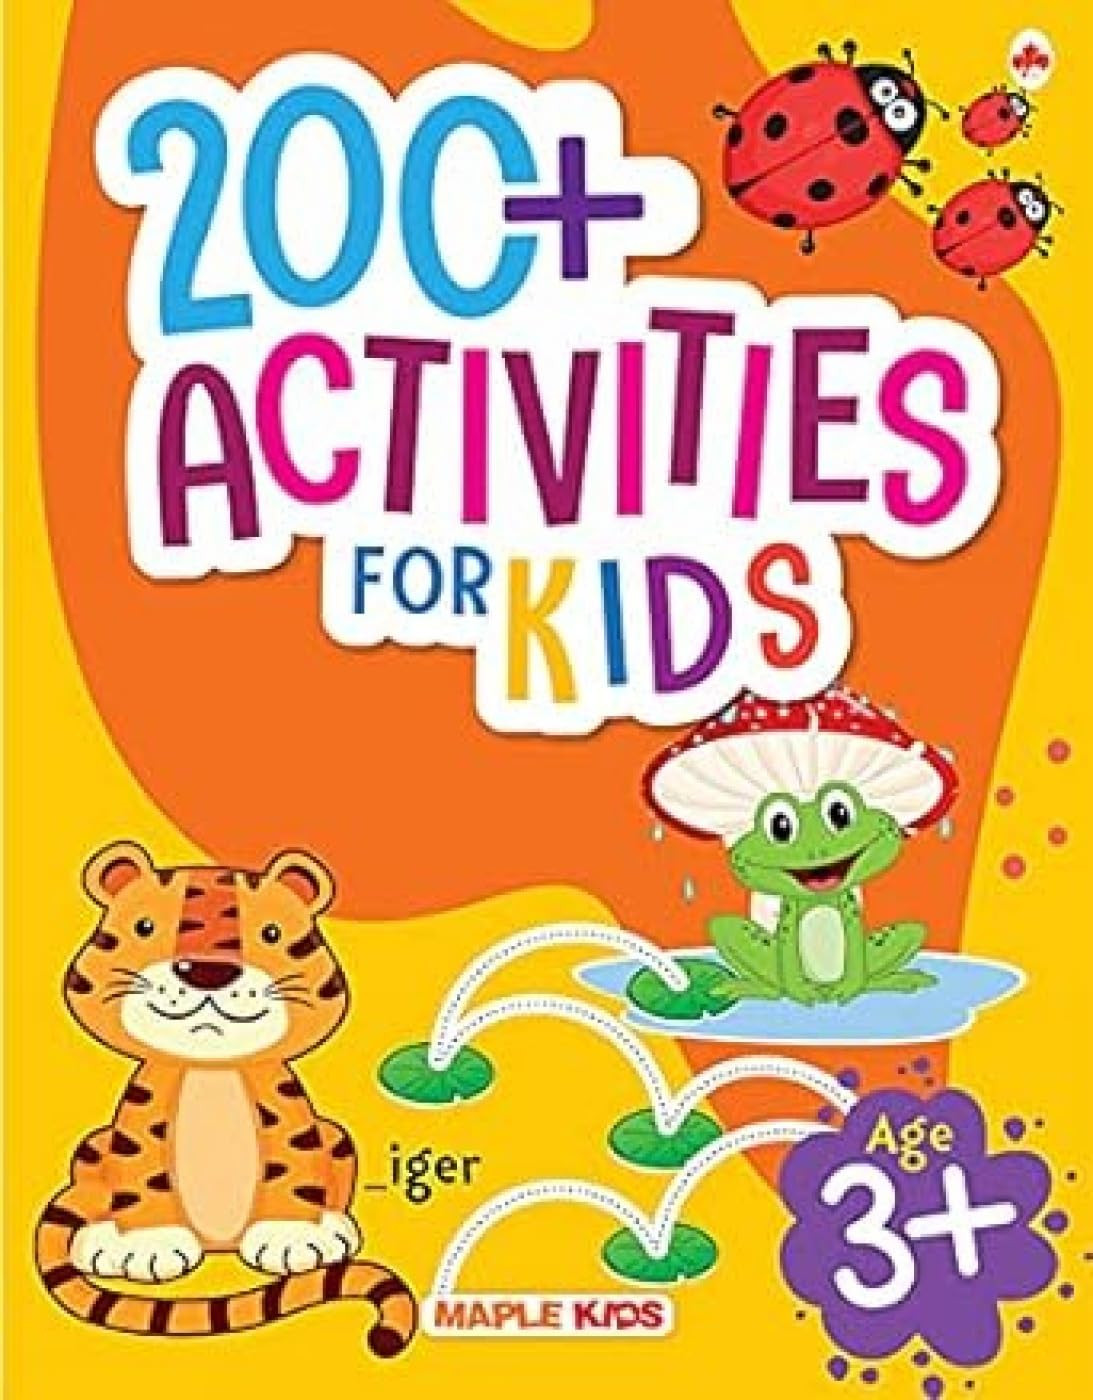 Brain Activity Book for Kids - 200+ Activities for Age 3+,Size